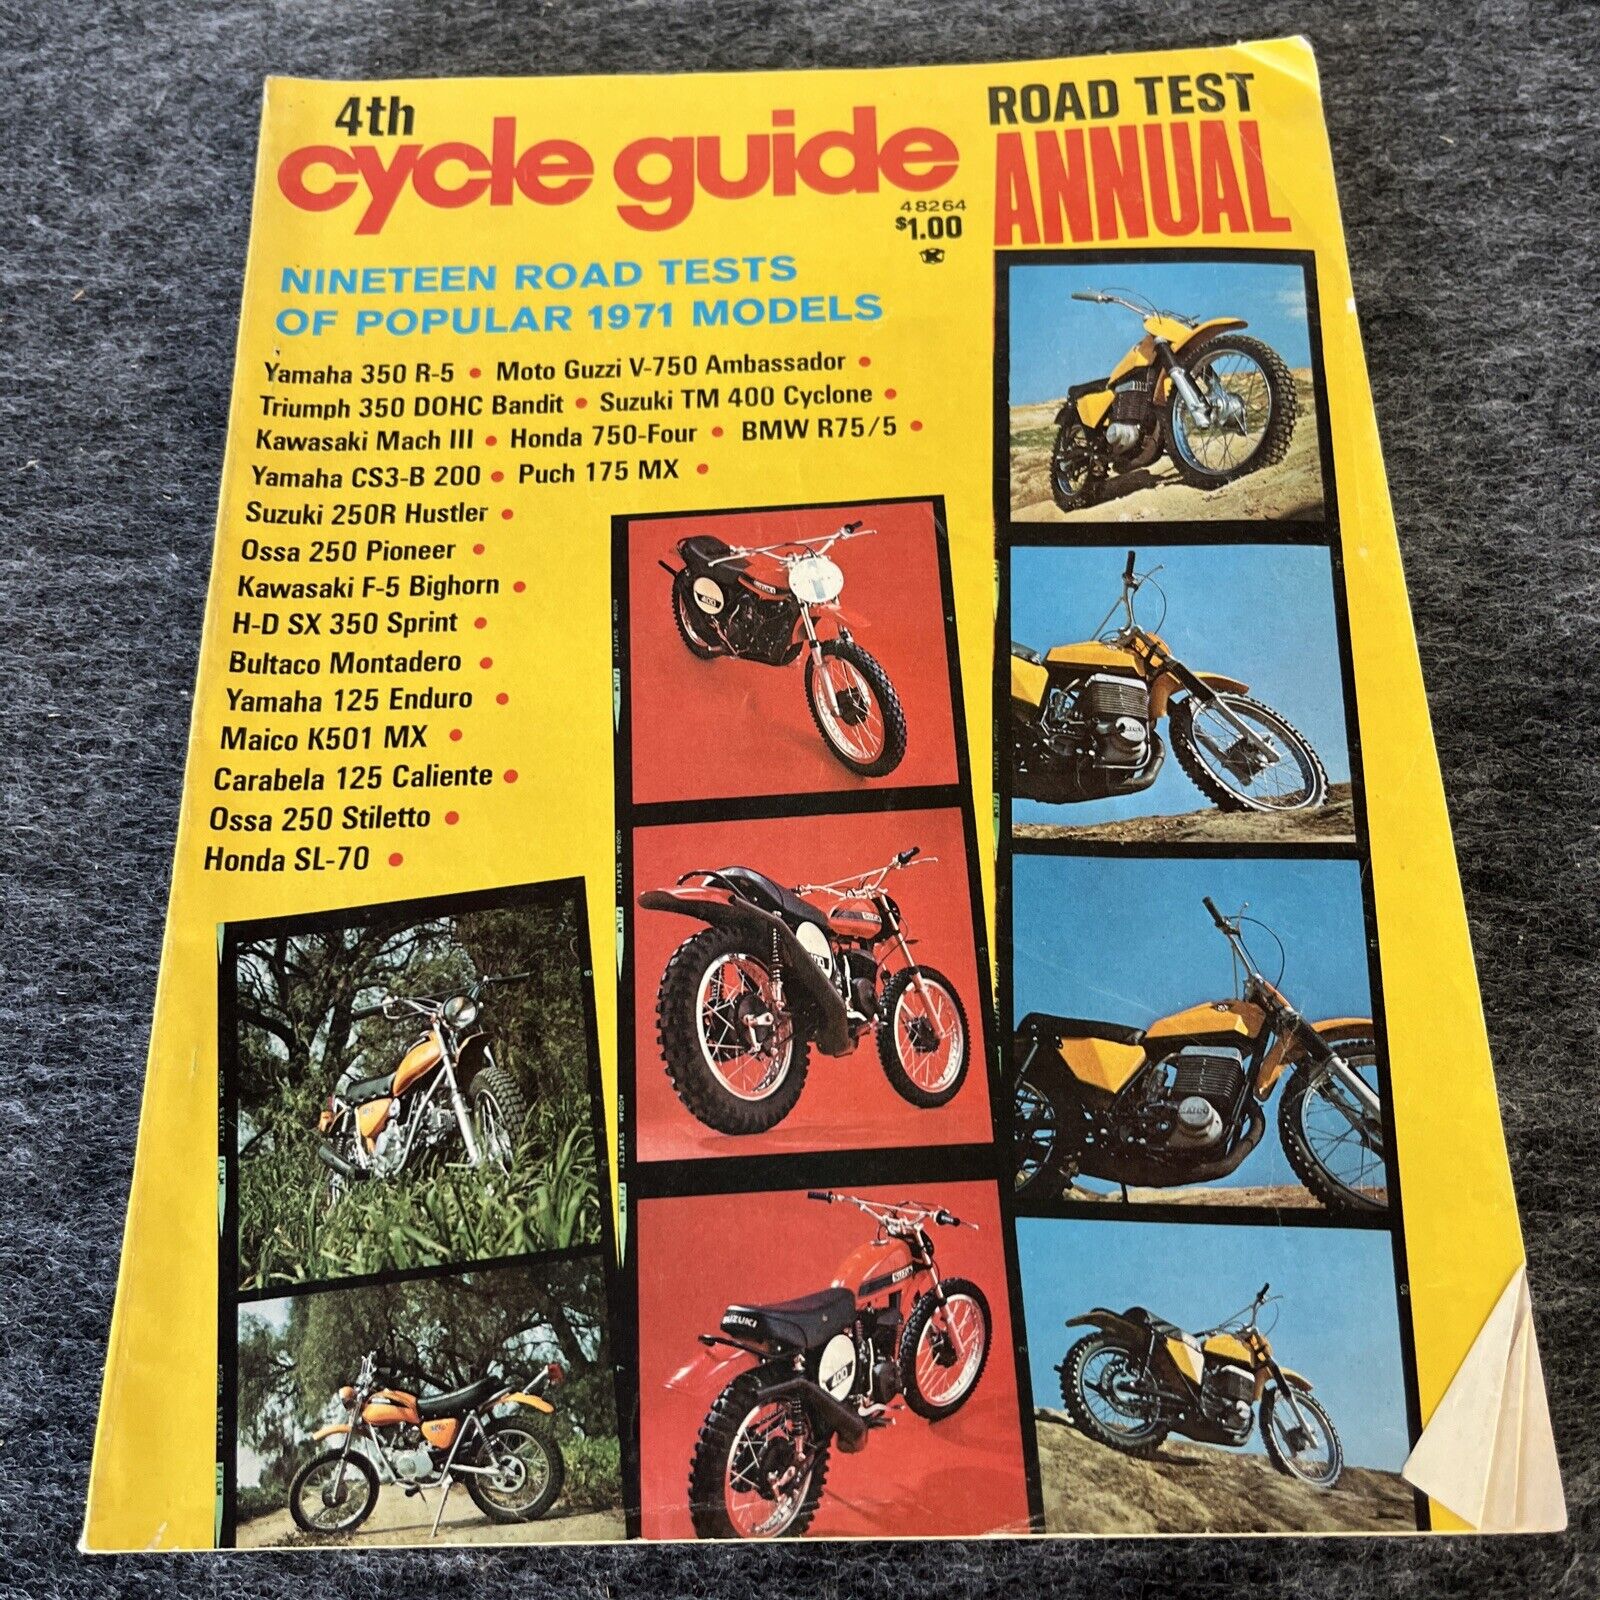 Vintage 1971 Cycle Guide Road Test 4th Annual Magazine Motorcycle 19 Models